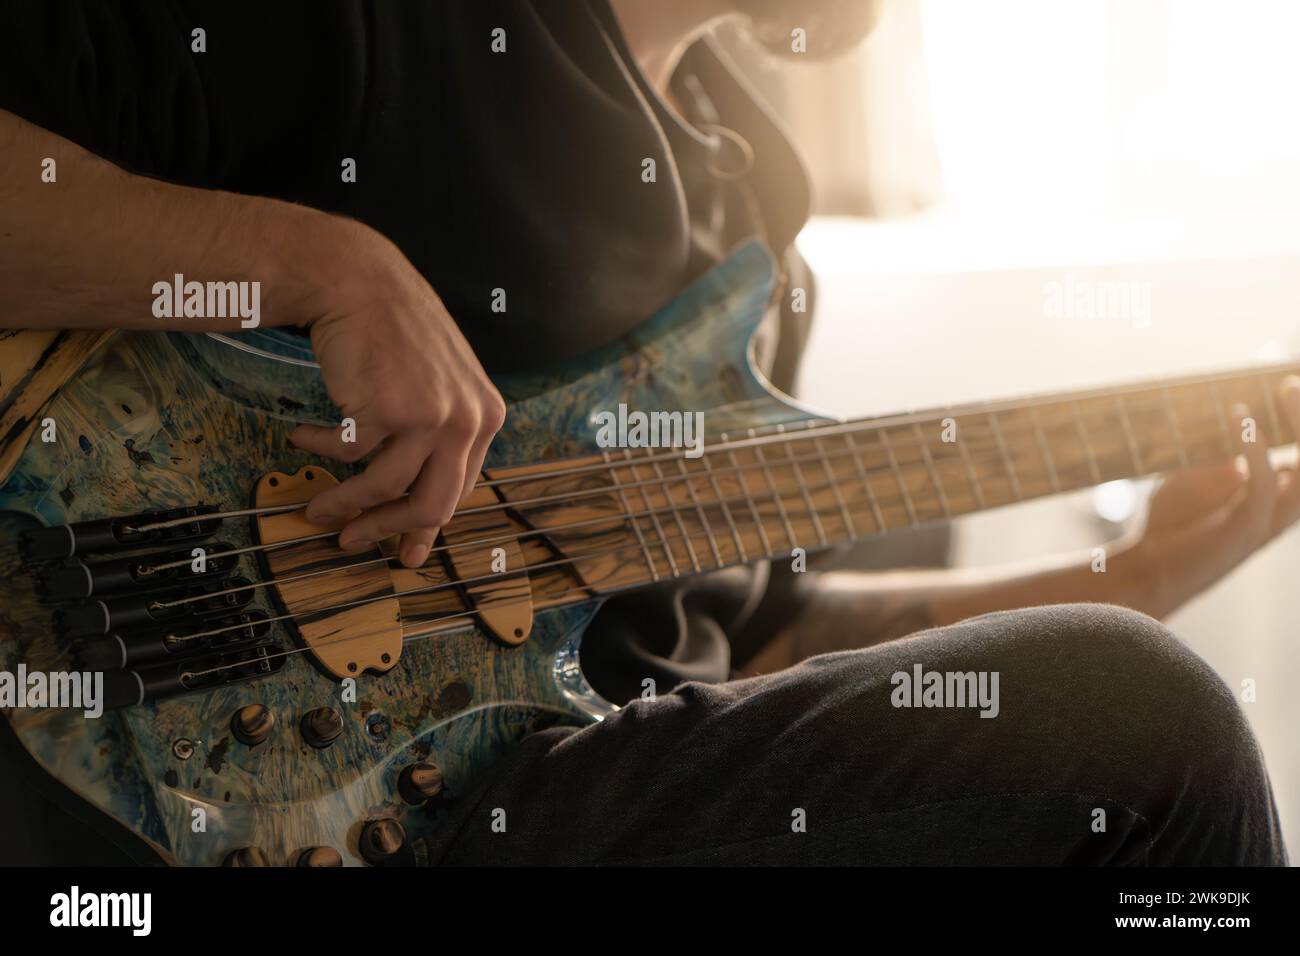 Close up of male hands playing bass guitar. His fingers on strings, creating music. Stock Photo